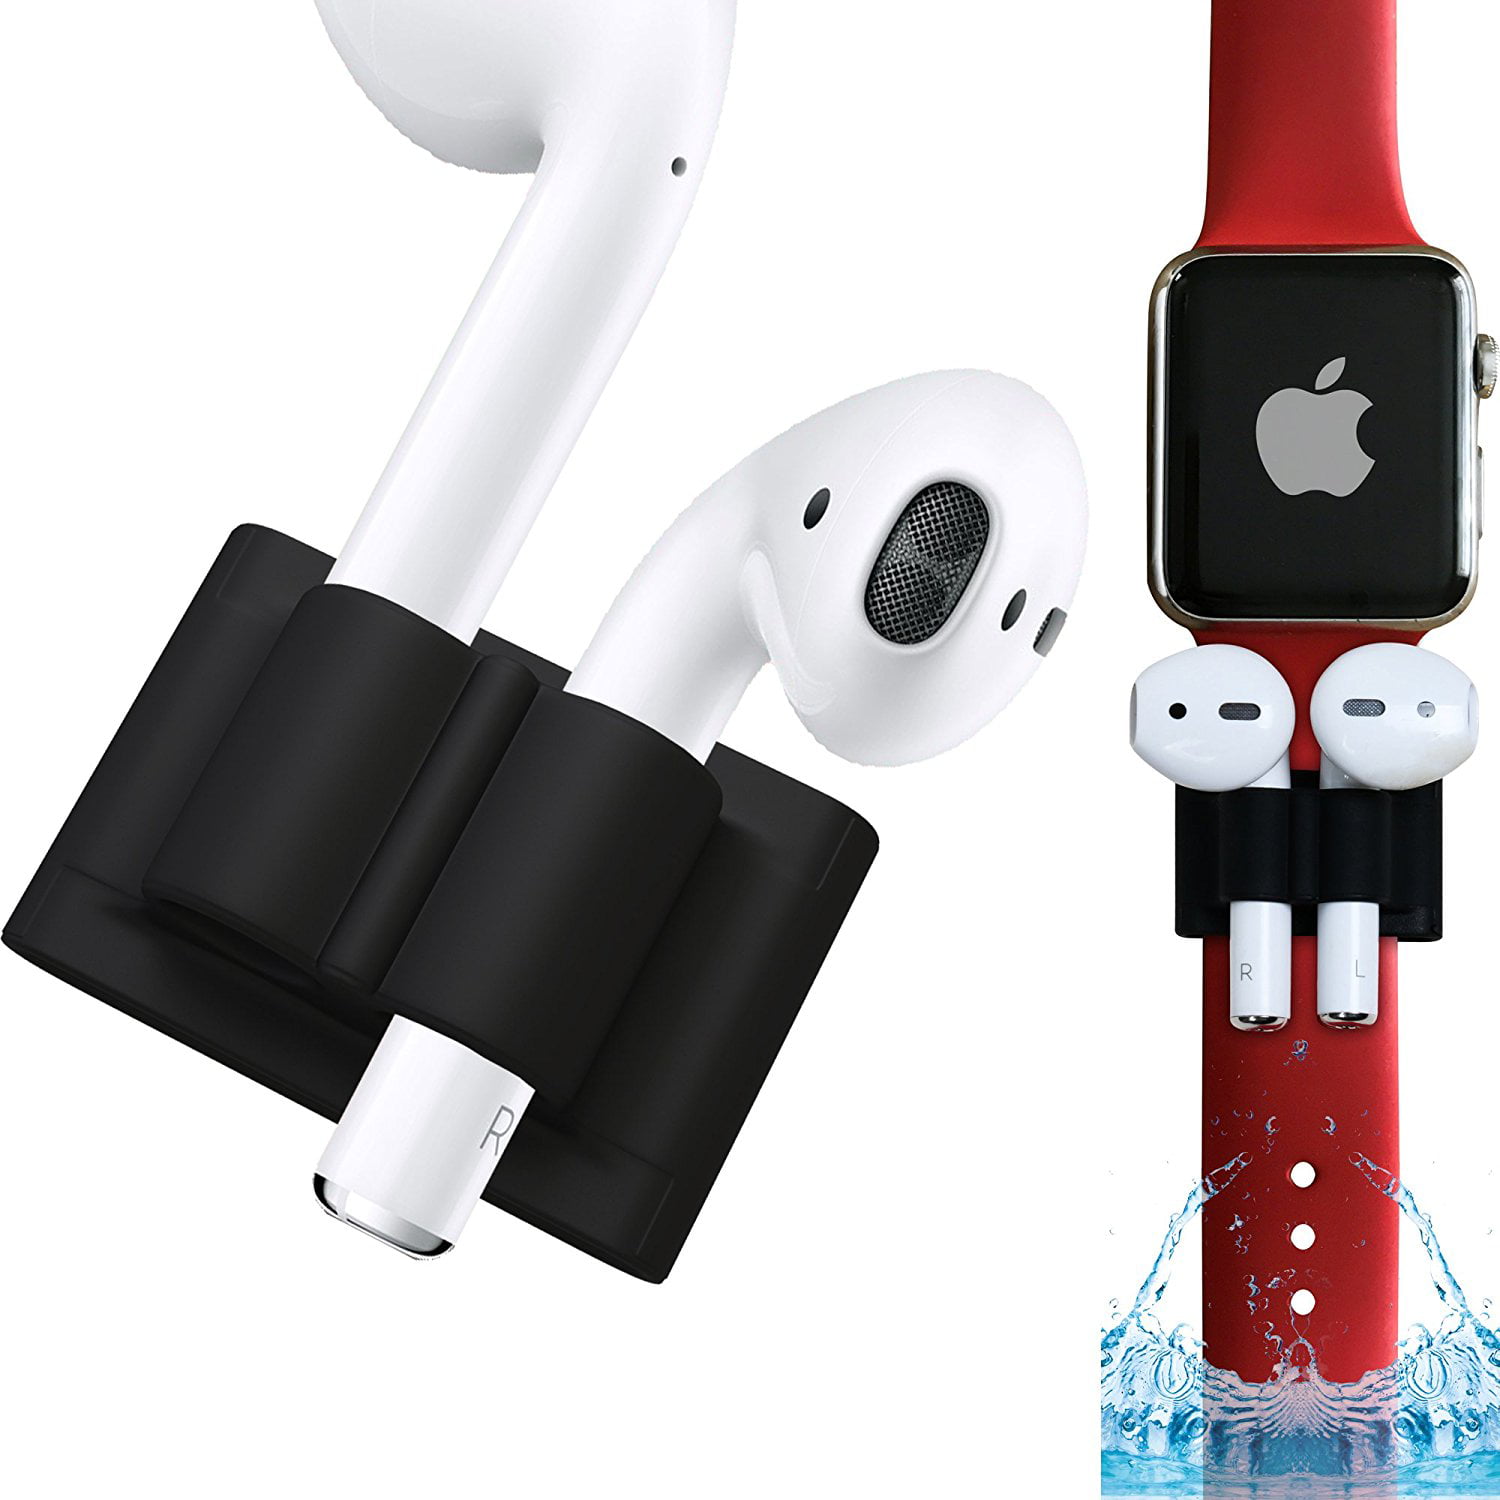 Use AirPods and other Bluetooth accessories with Apple Watch - Apple Support